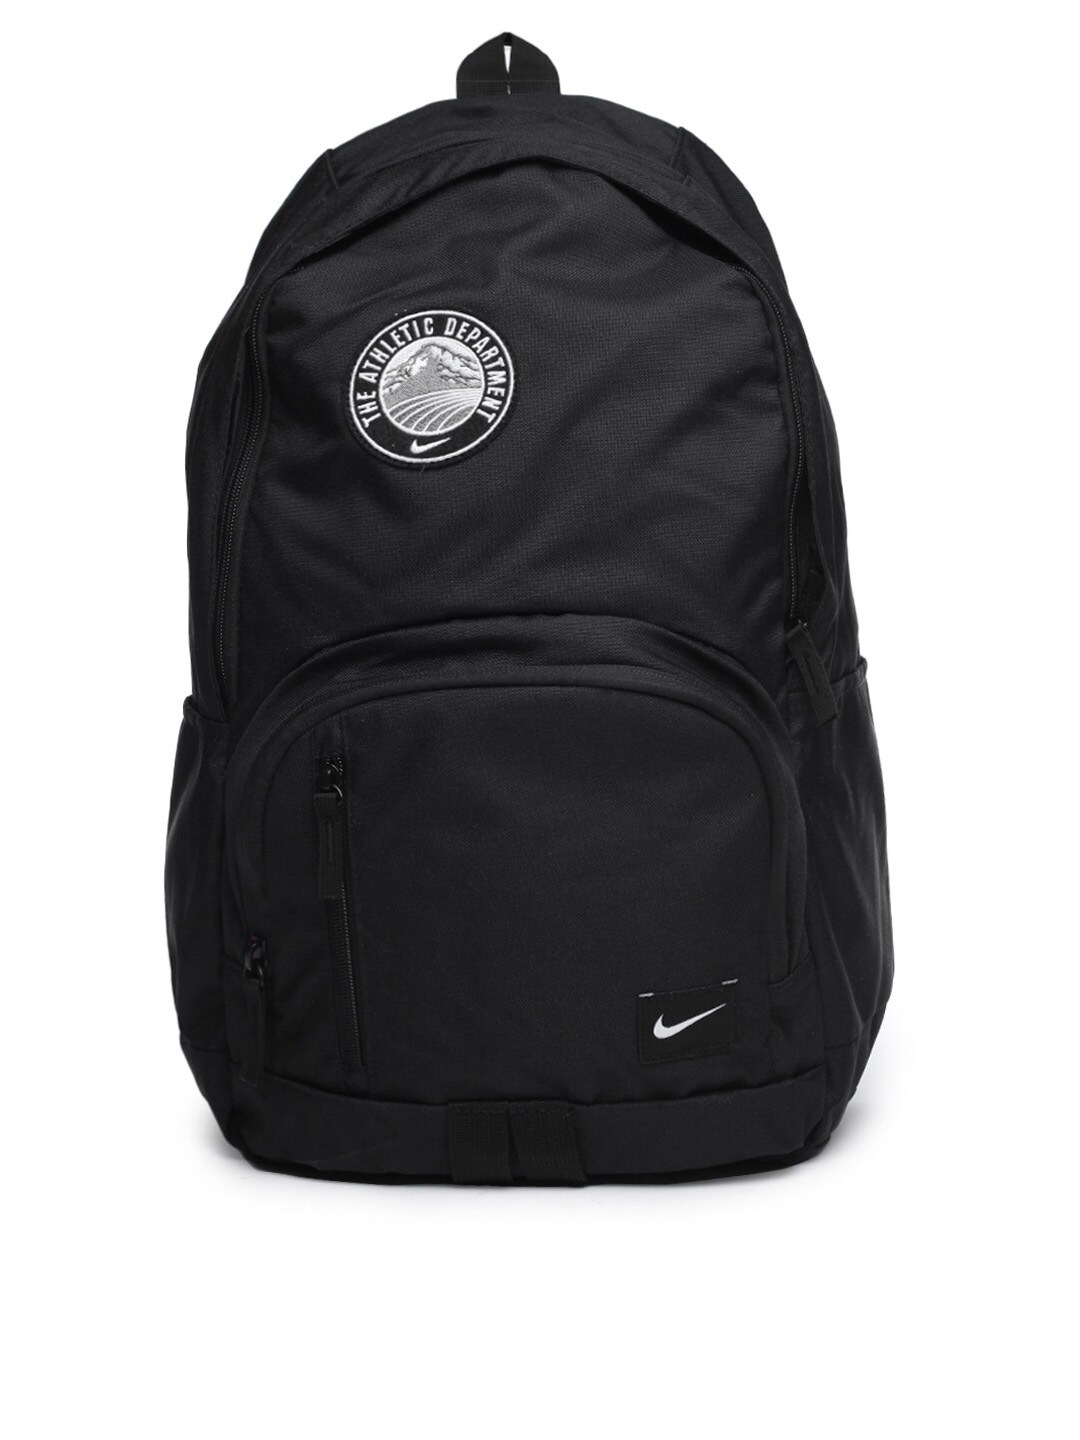 Nike Unisex All Access SO Black Backpack